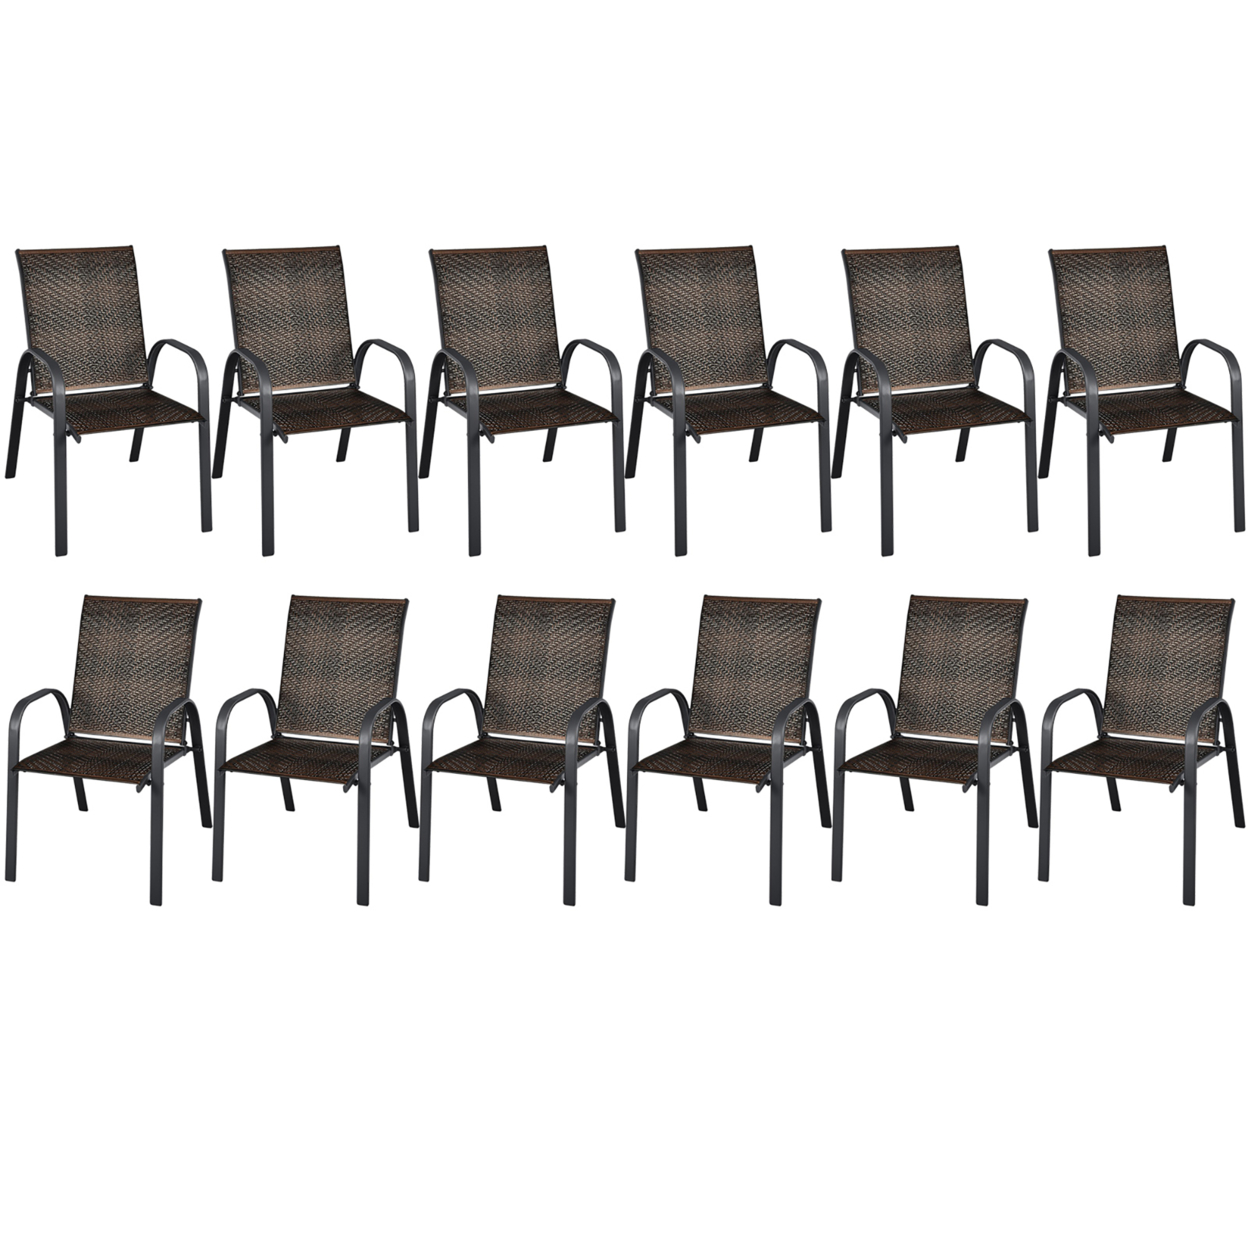 12PCS Outdoor PE Wicker Stacking Dining Chairs Patio Arm Chairs - Brown